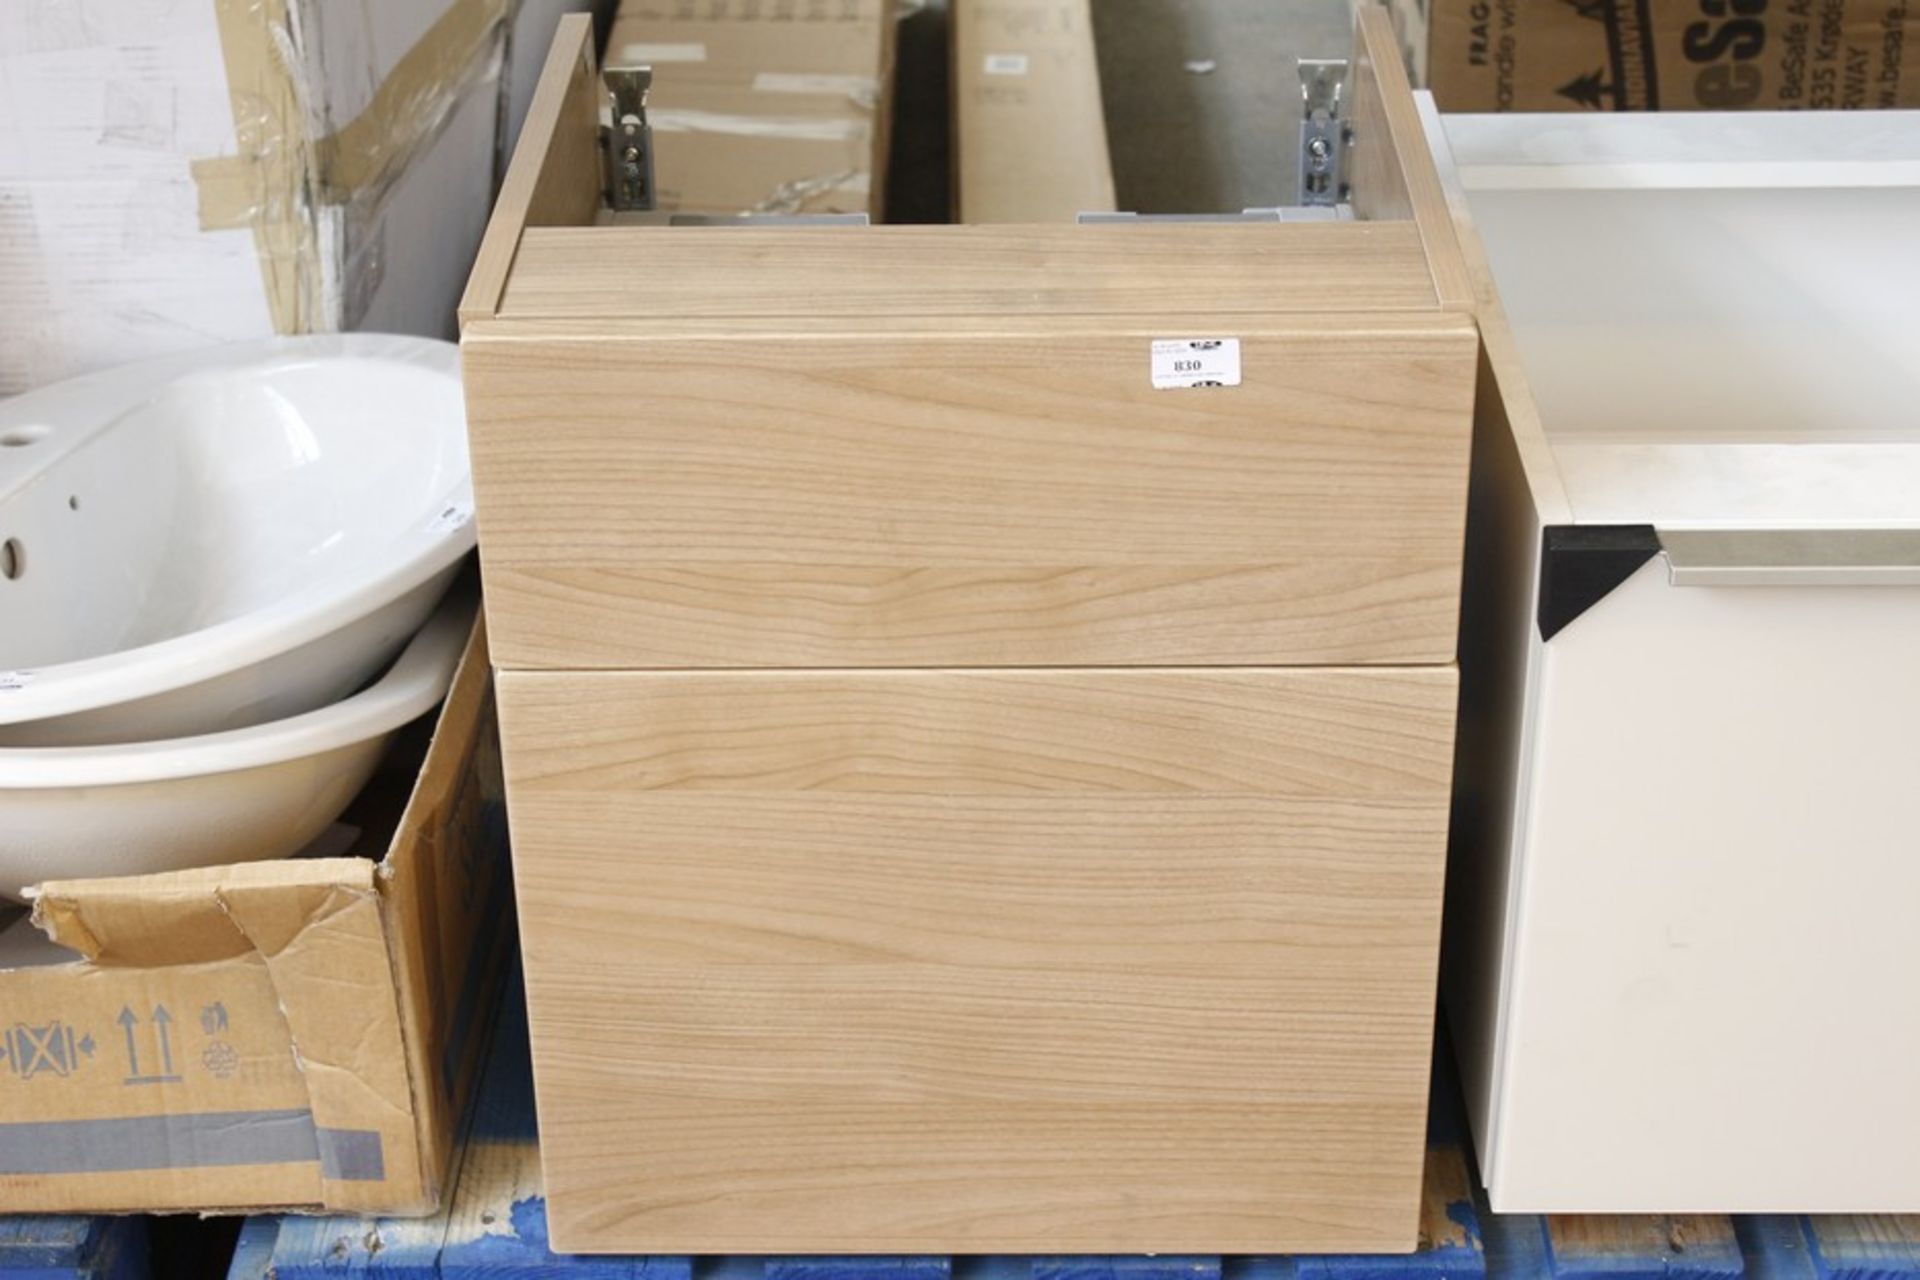 1 x LIGHT OAK 2 DRAWER VANITY UNIT   *PLEASE NOTE THAT THE BID PRICE IS MULTIPLIED BY THE NUMBER